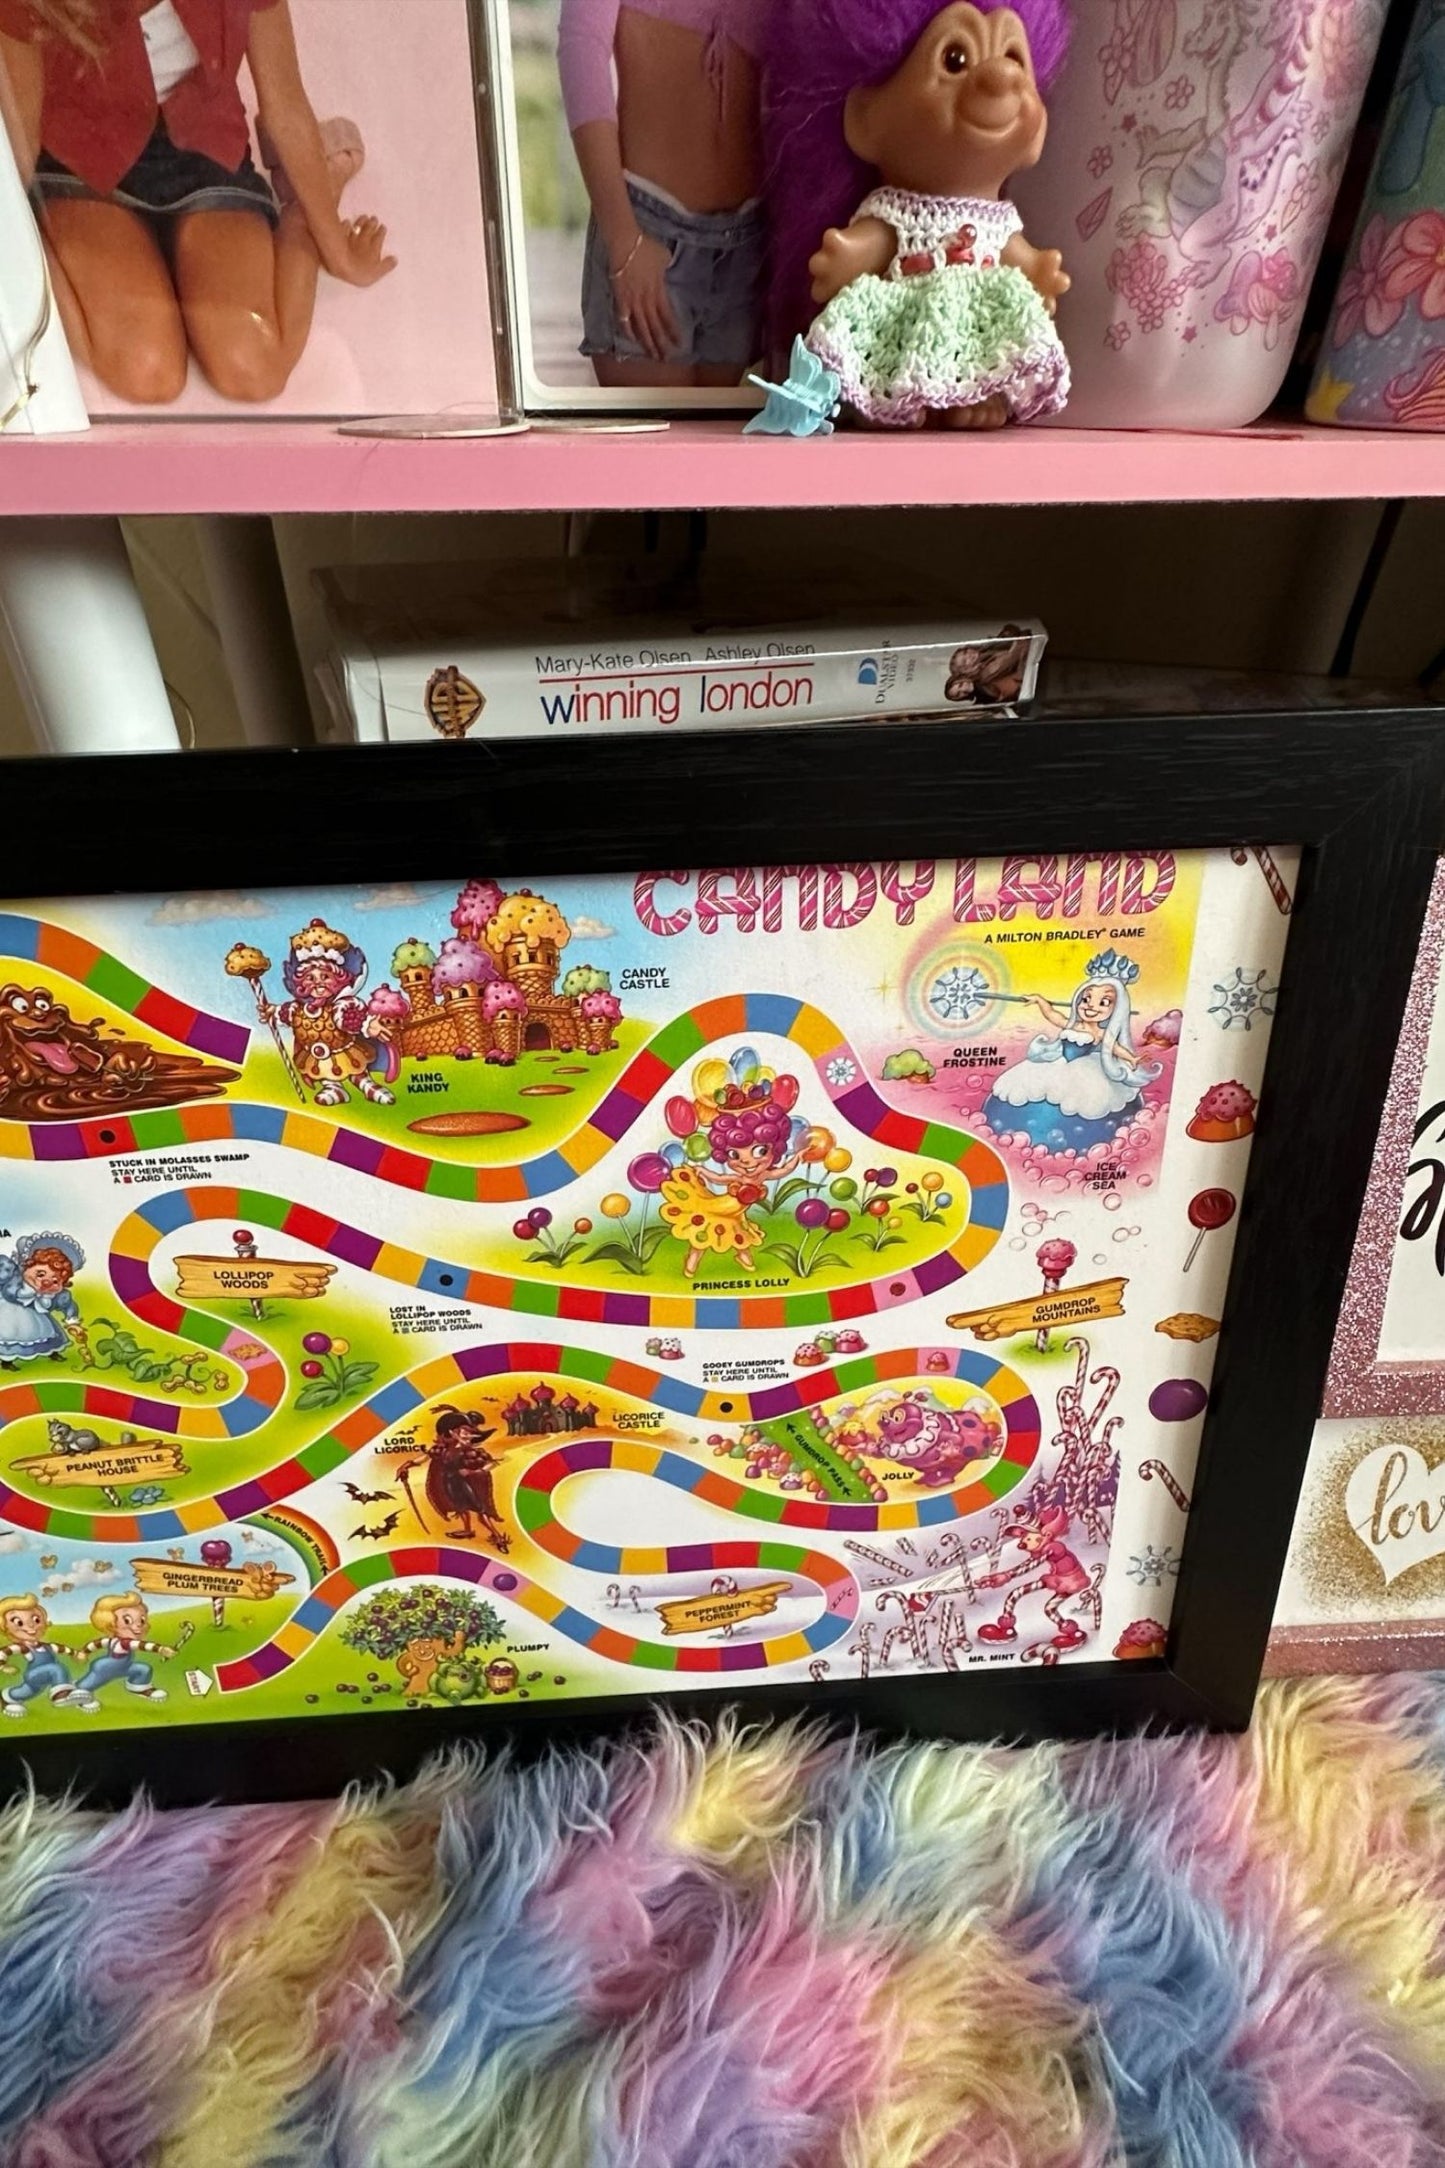 CANDYLAND WALL PHOTO*